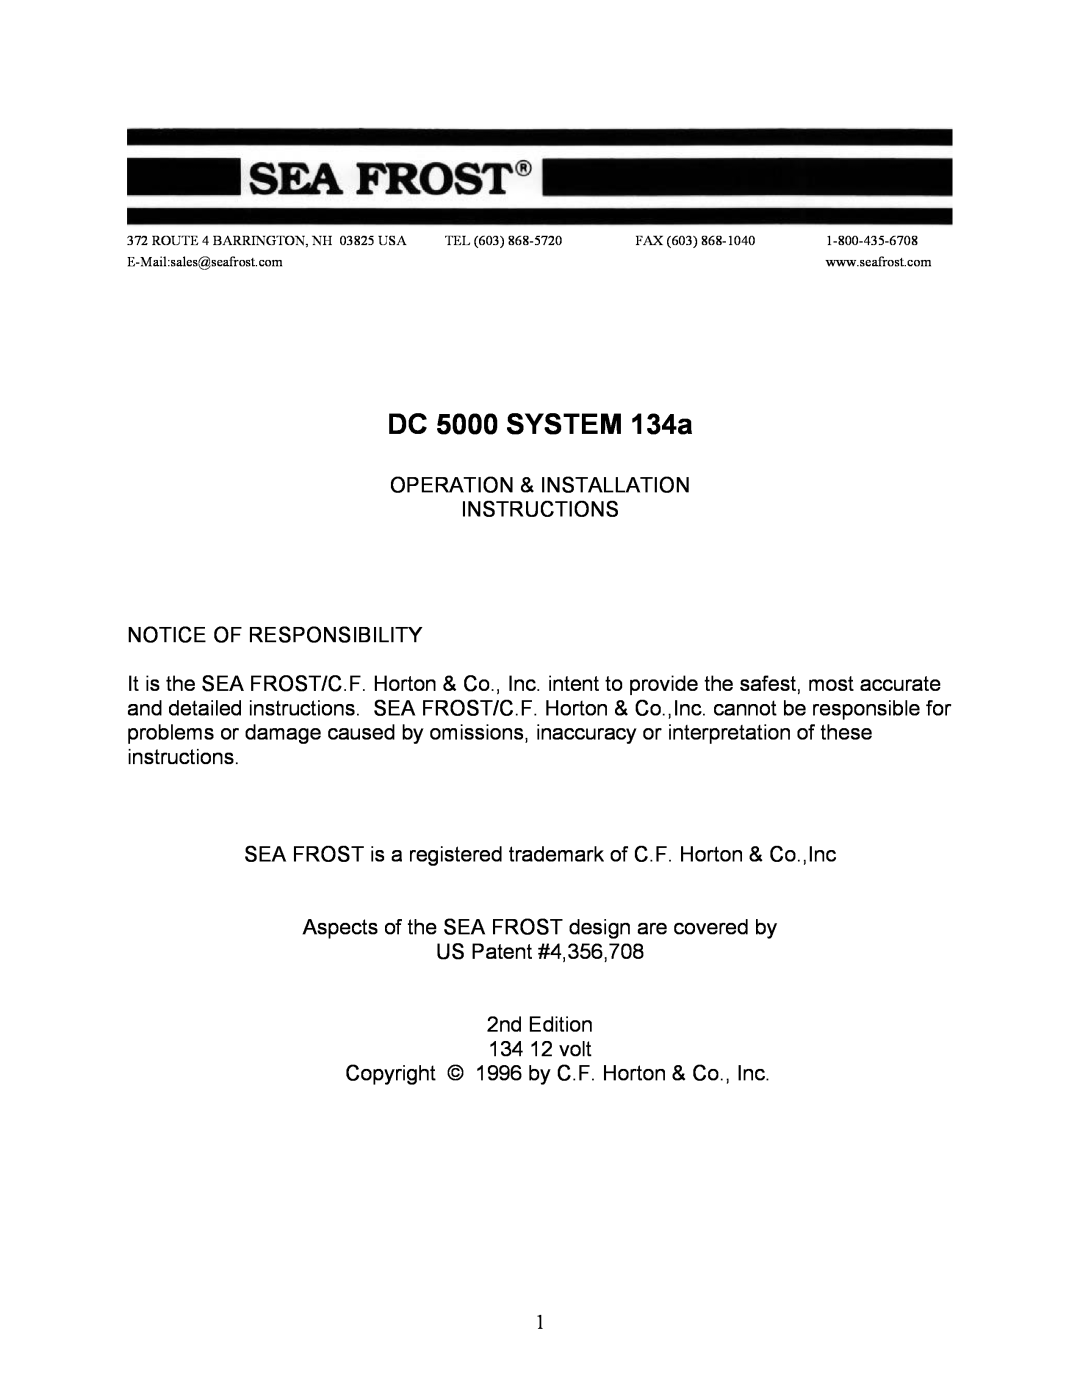 Sea Frost installation instructions DC 5000 SYSTEM 134a 